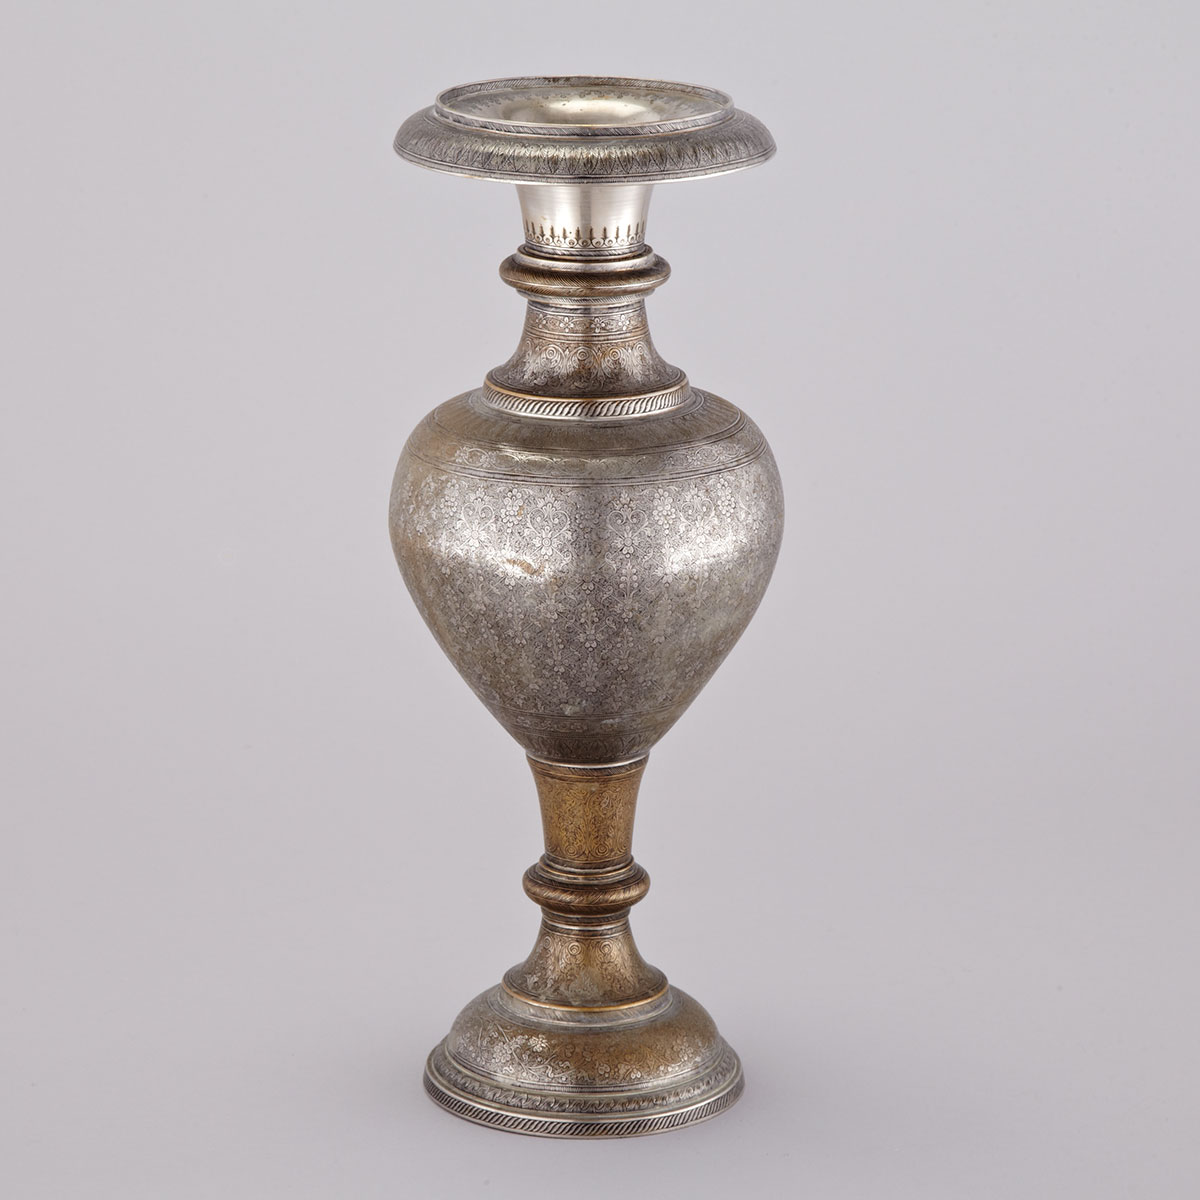 Large Indian Turned, Tinned and Chased Brass Vase, Moradabad, 19th Century